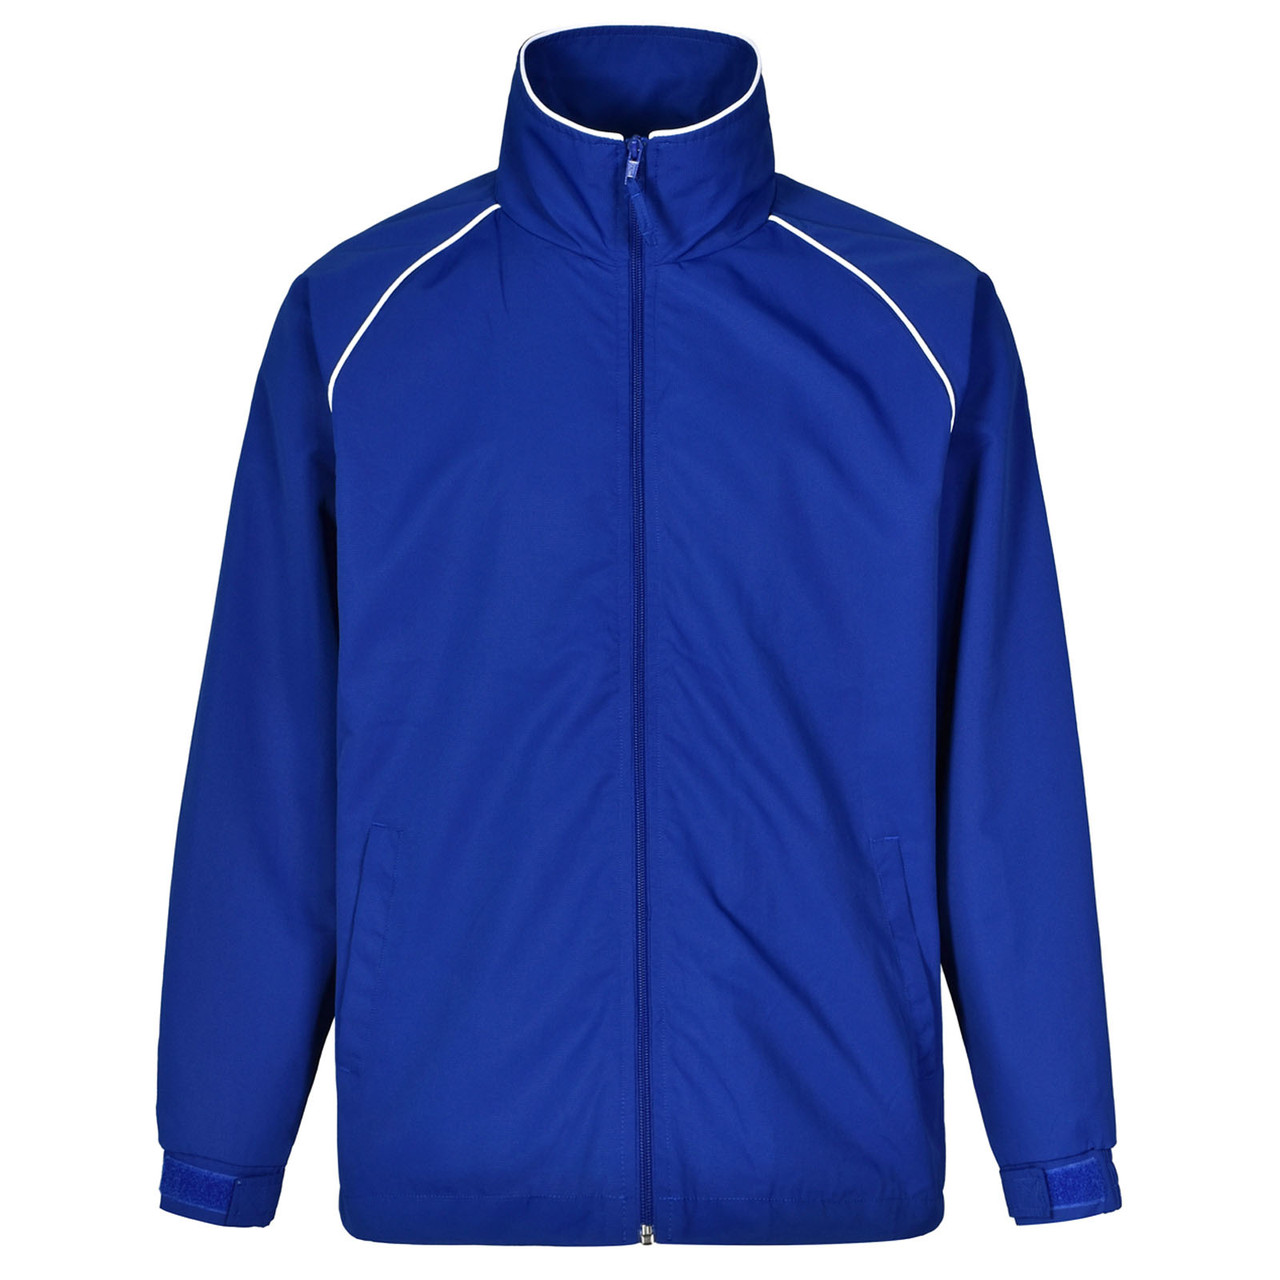 Kids Sports Track Jackets with Contrast Piping | Shop Team Wear Online